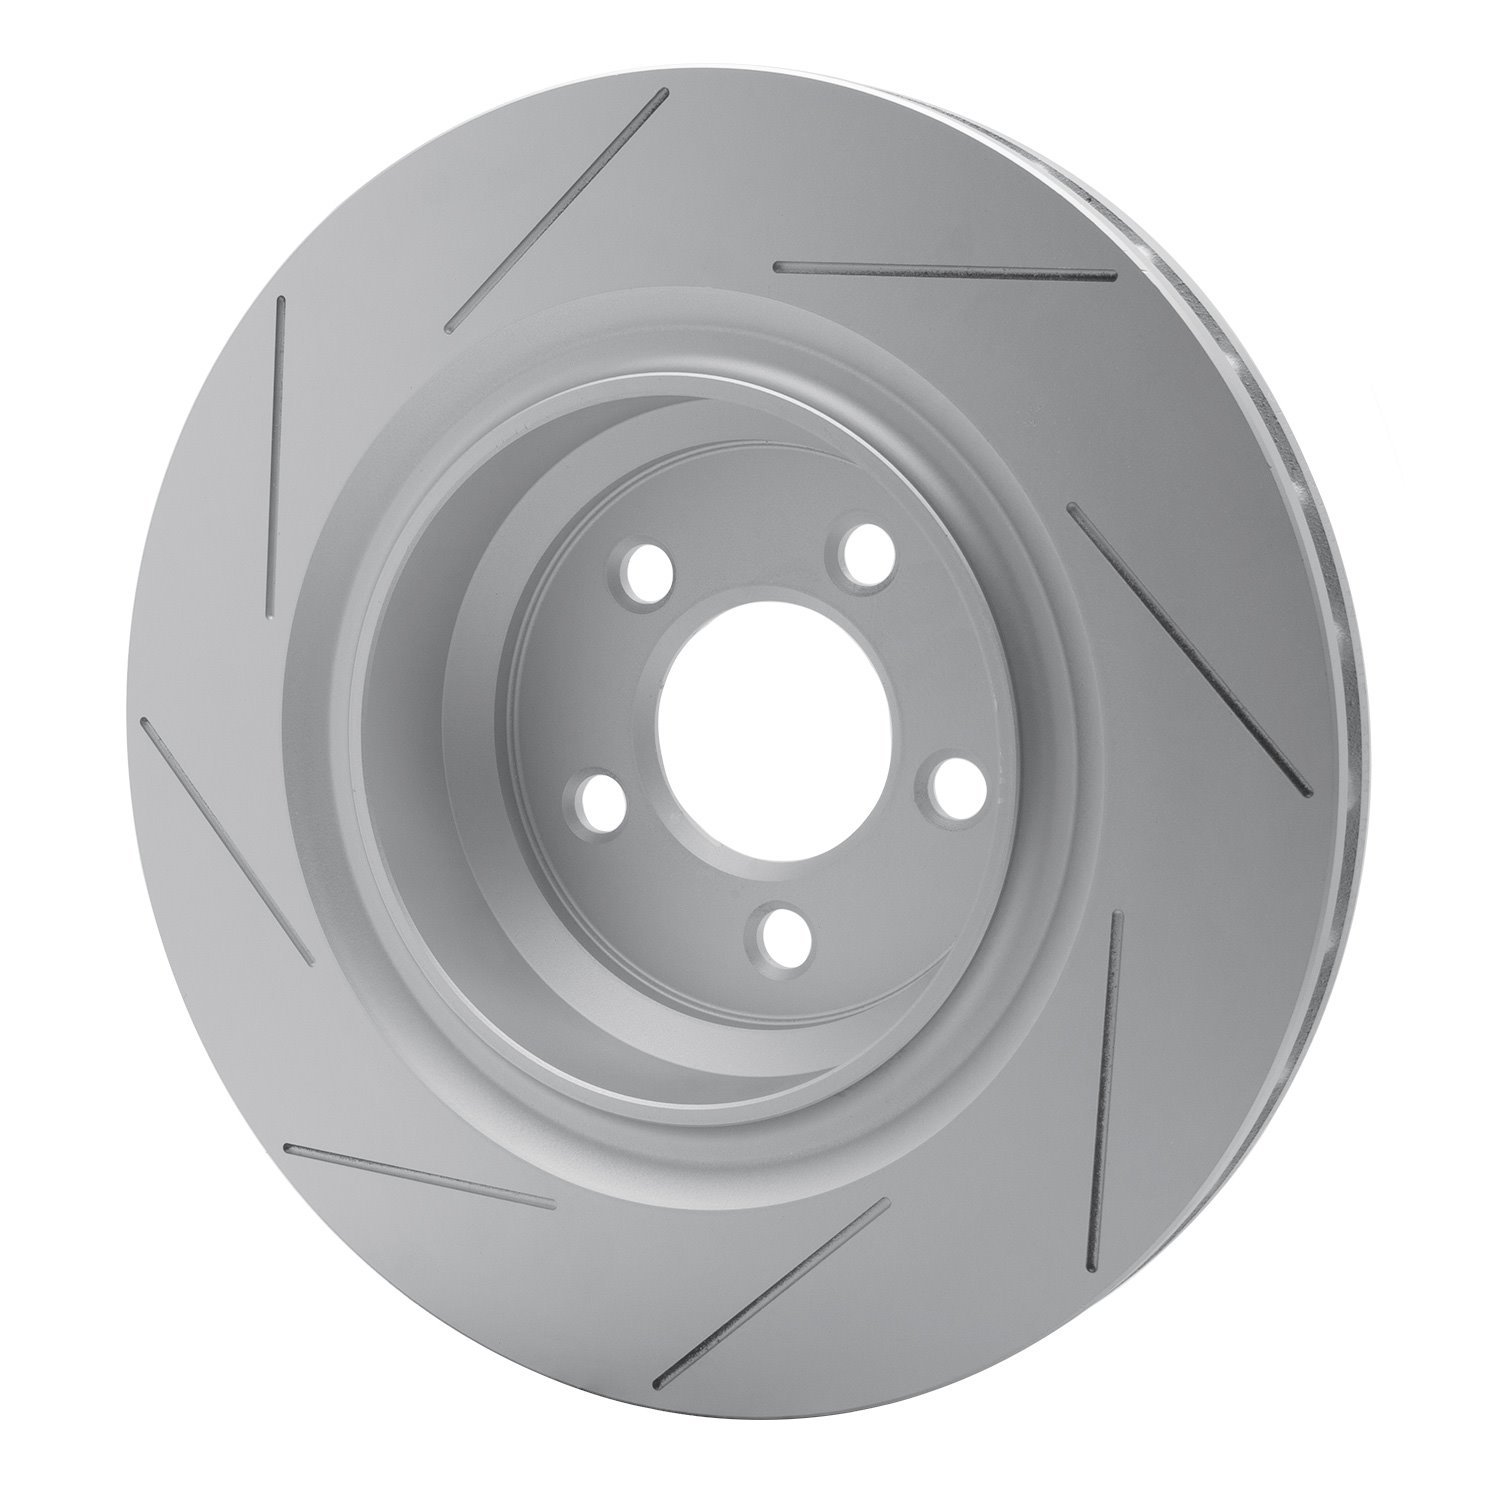 GEOSPEC Slotted Rotor [Coated], Fits Select Mopar